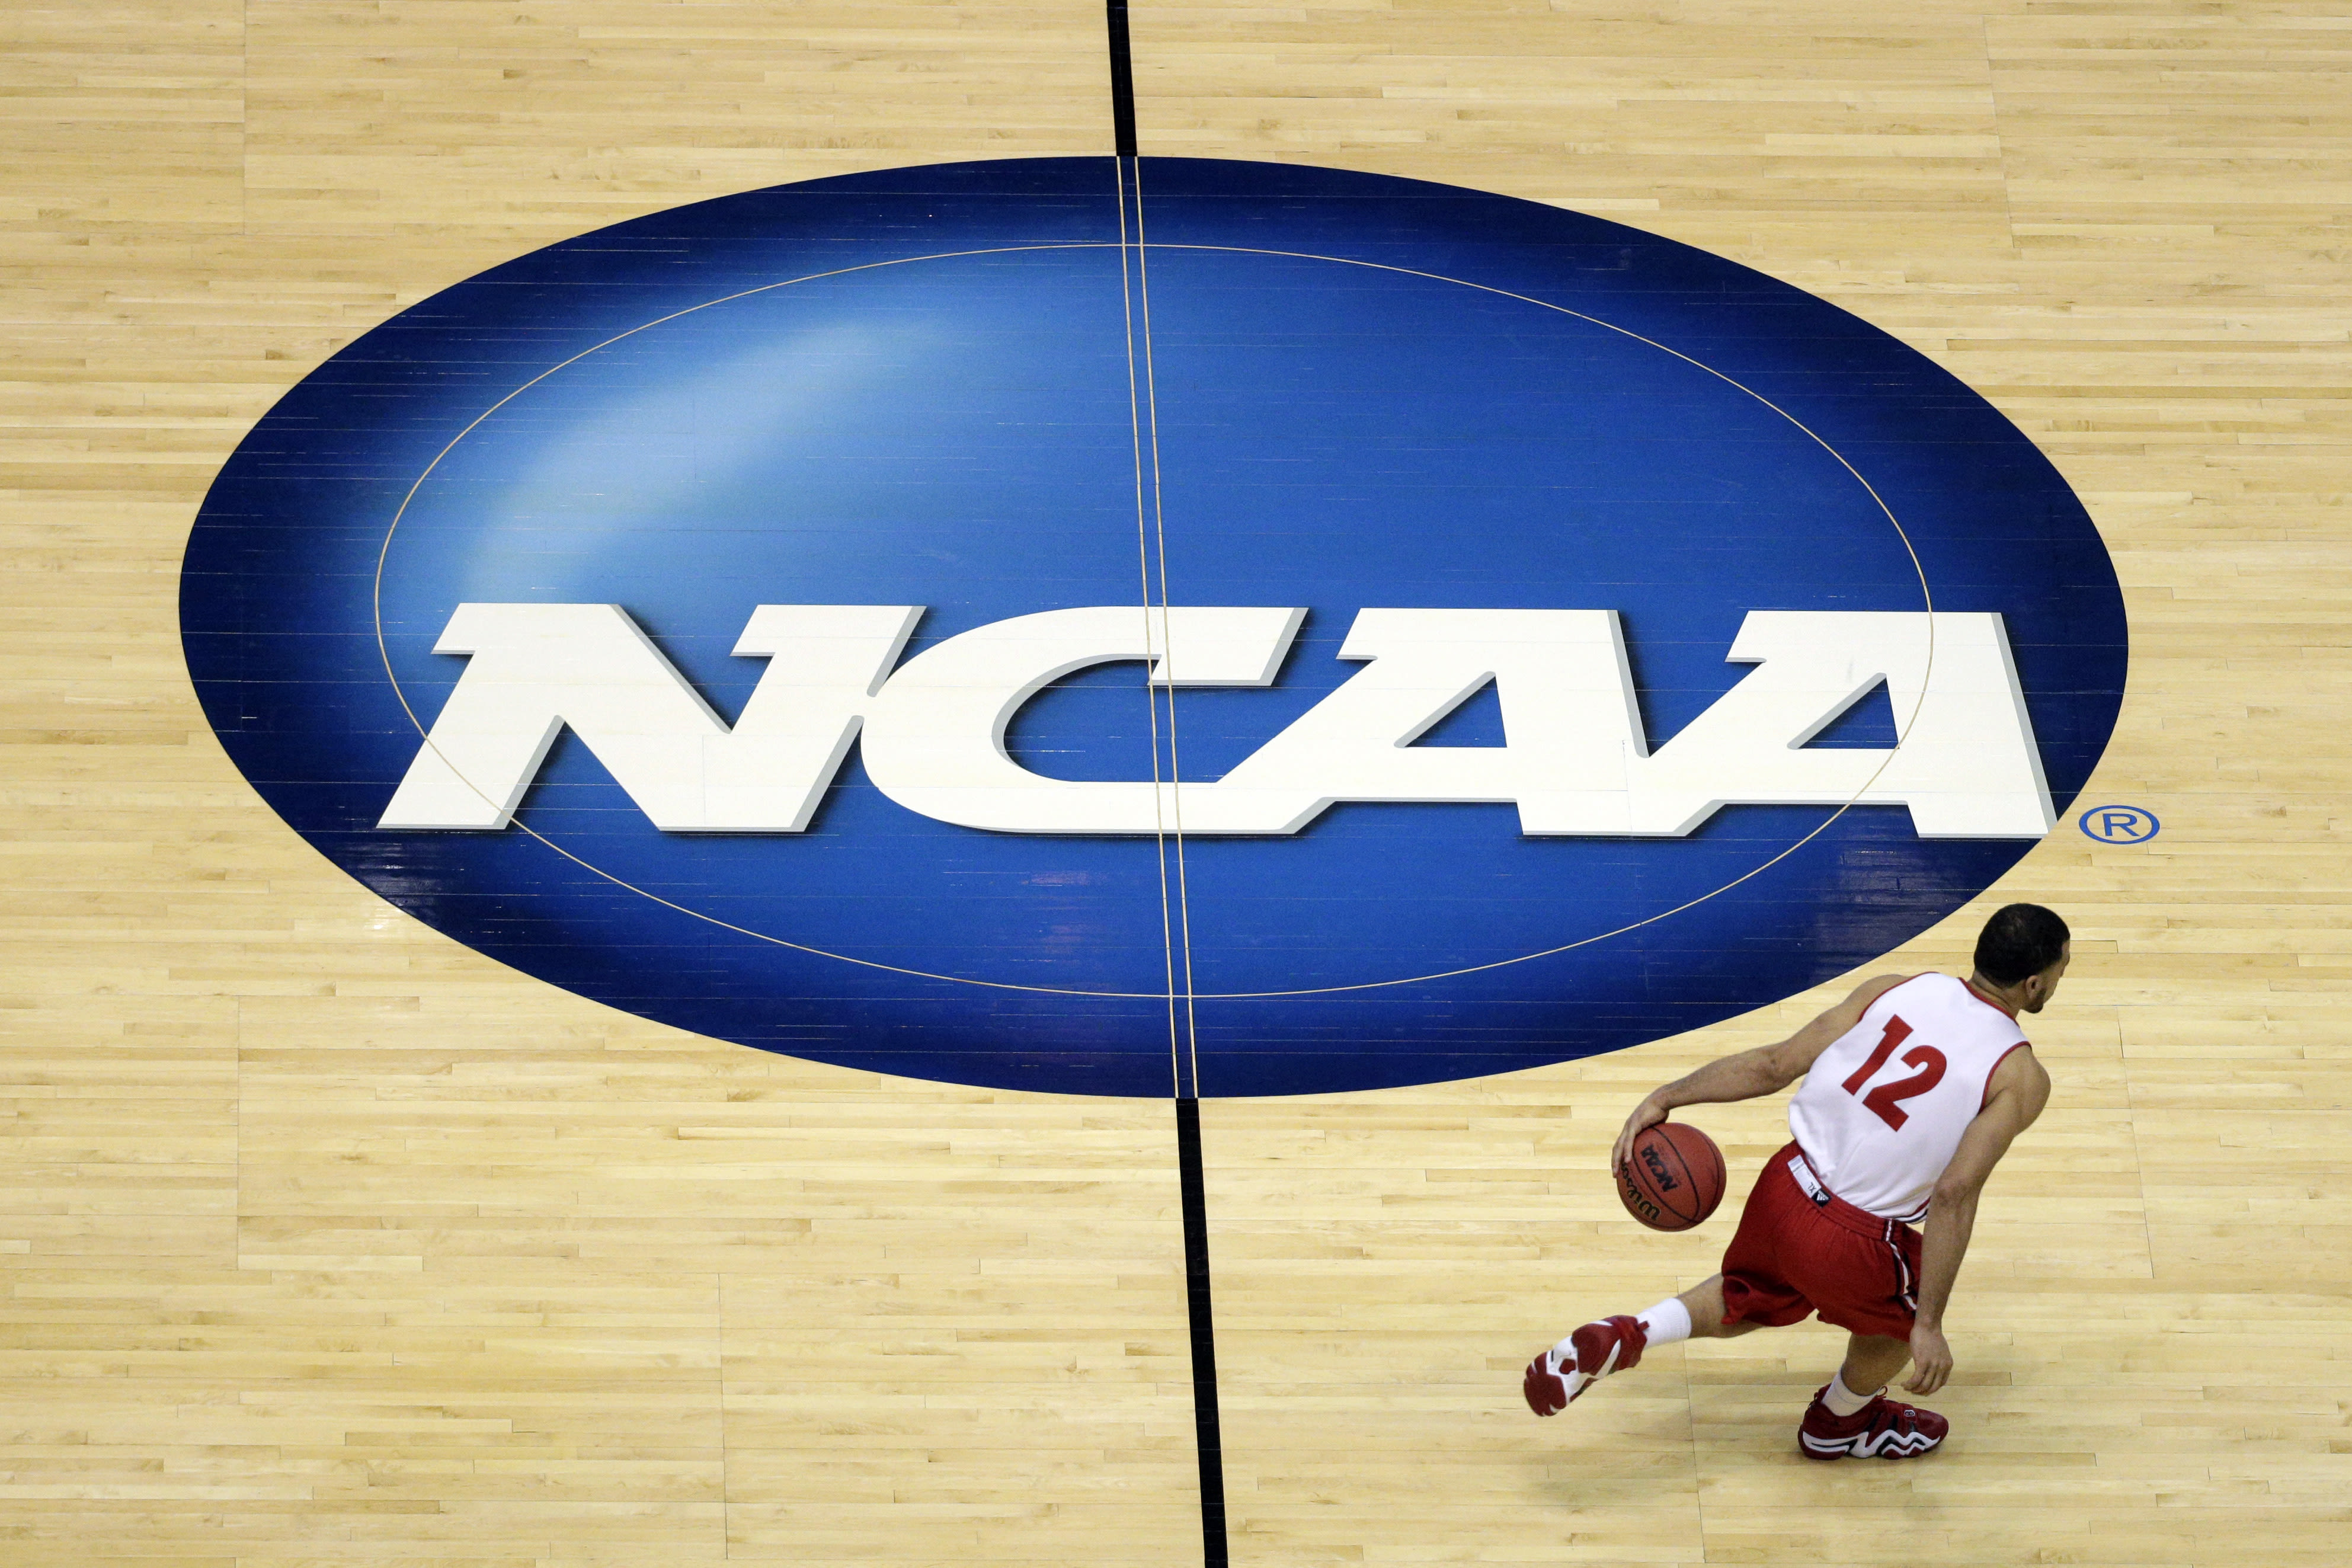 Schools in basketball-centric face leagues face different economic challenges with NCAA settlement